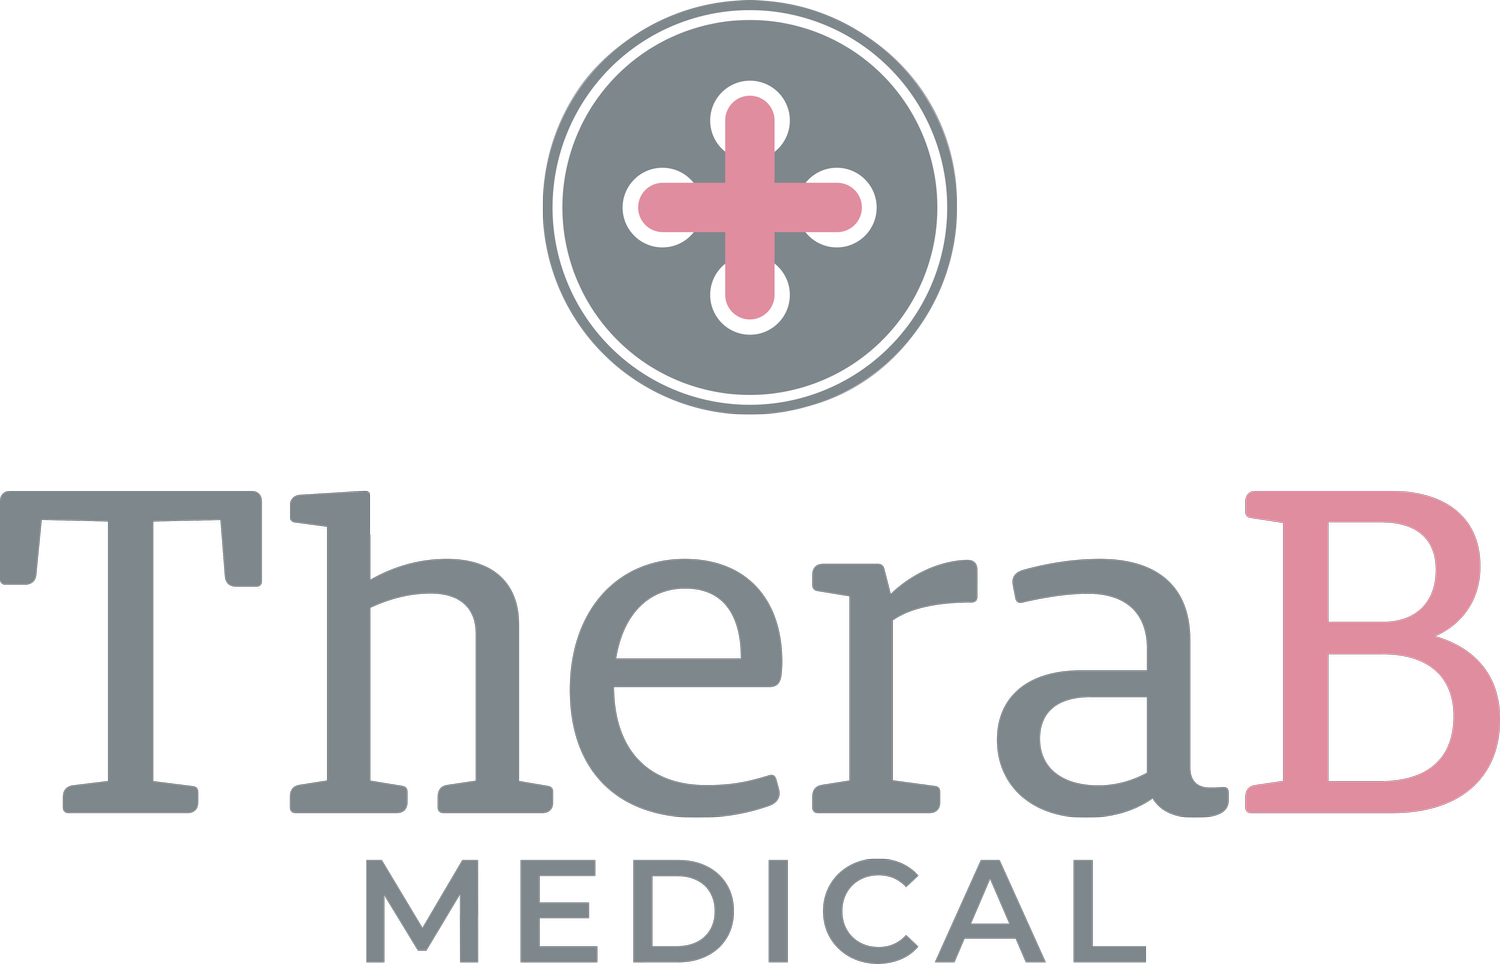 TheraB Medical